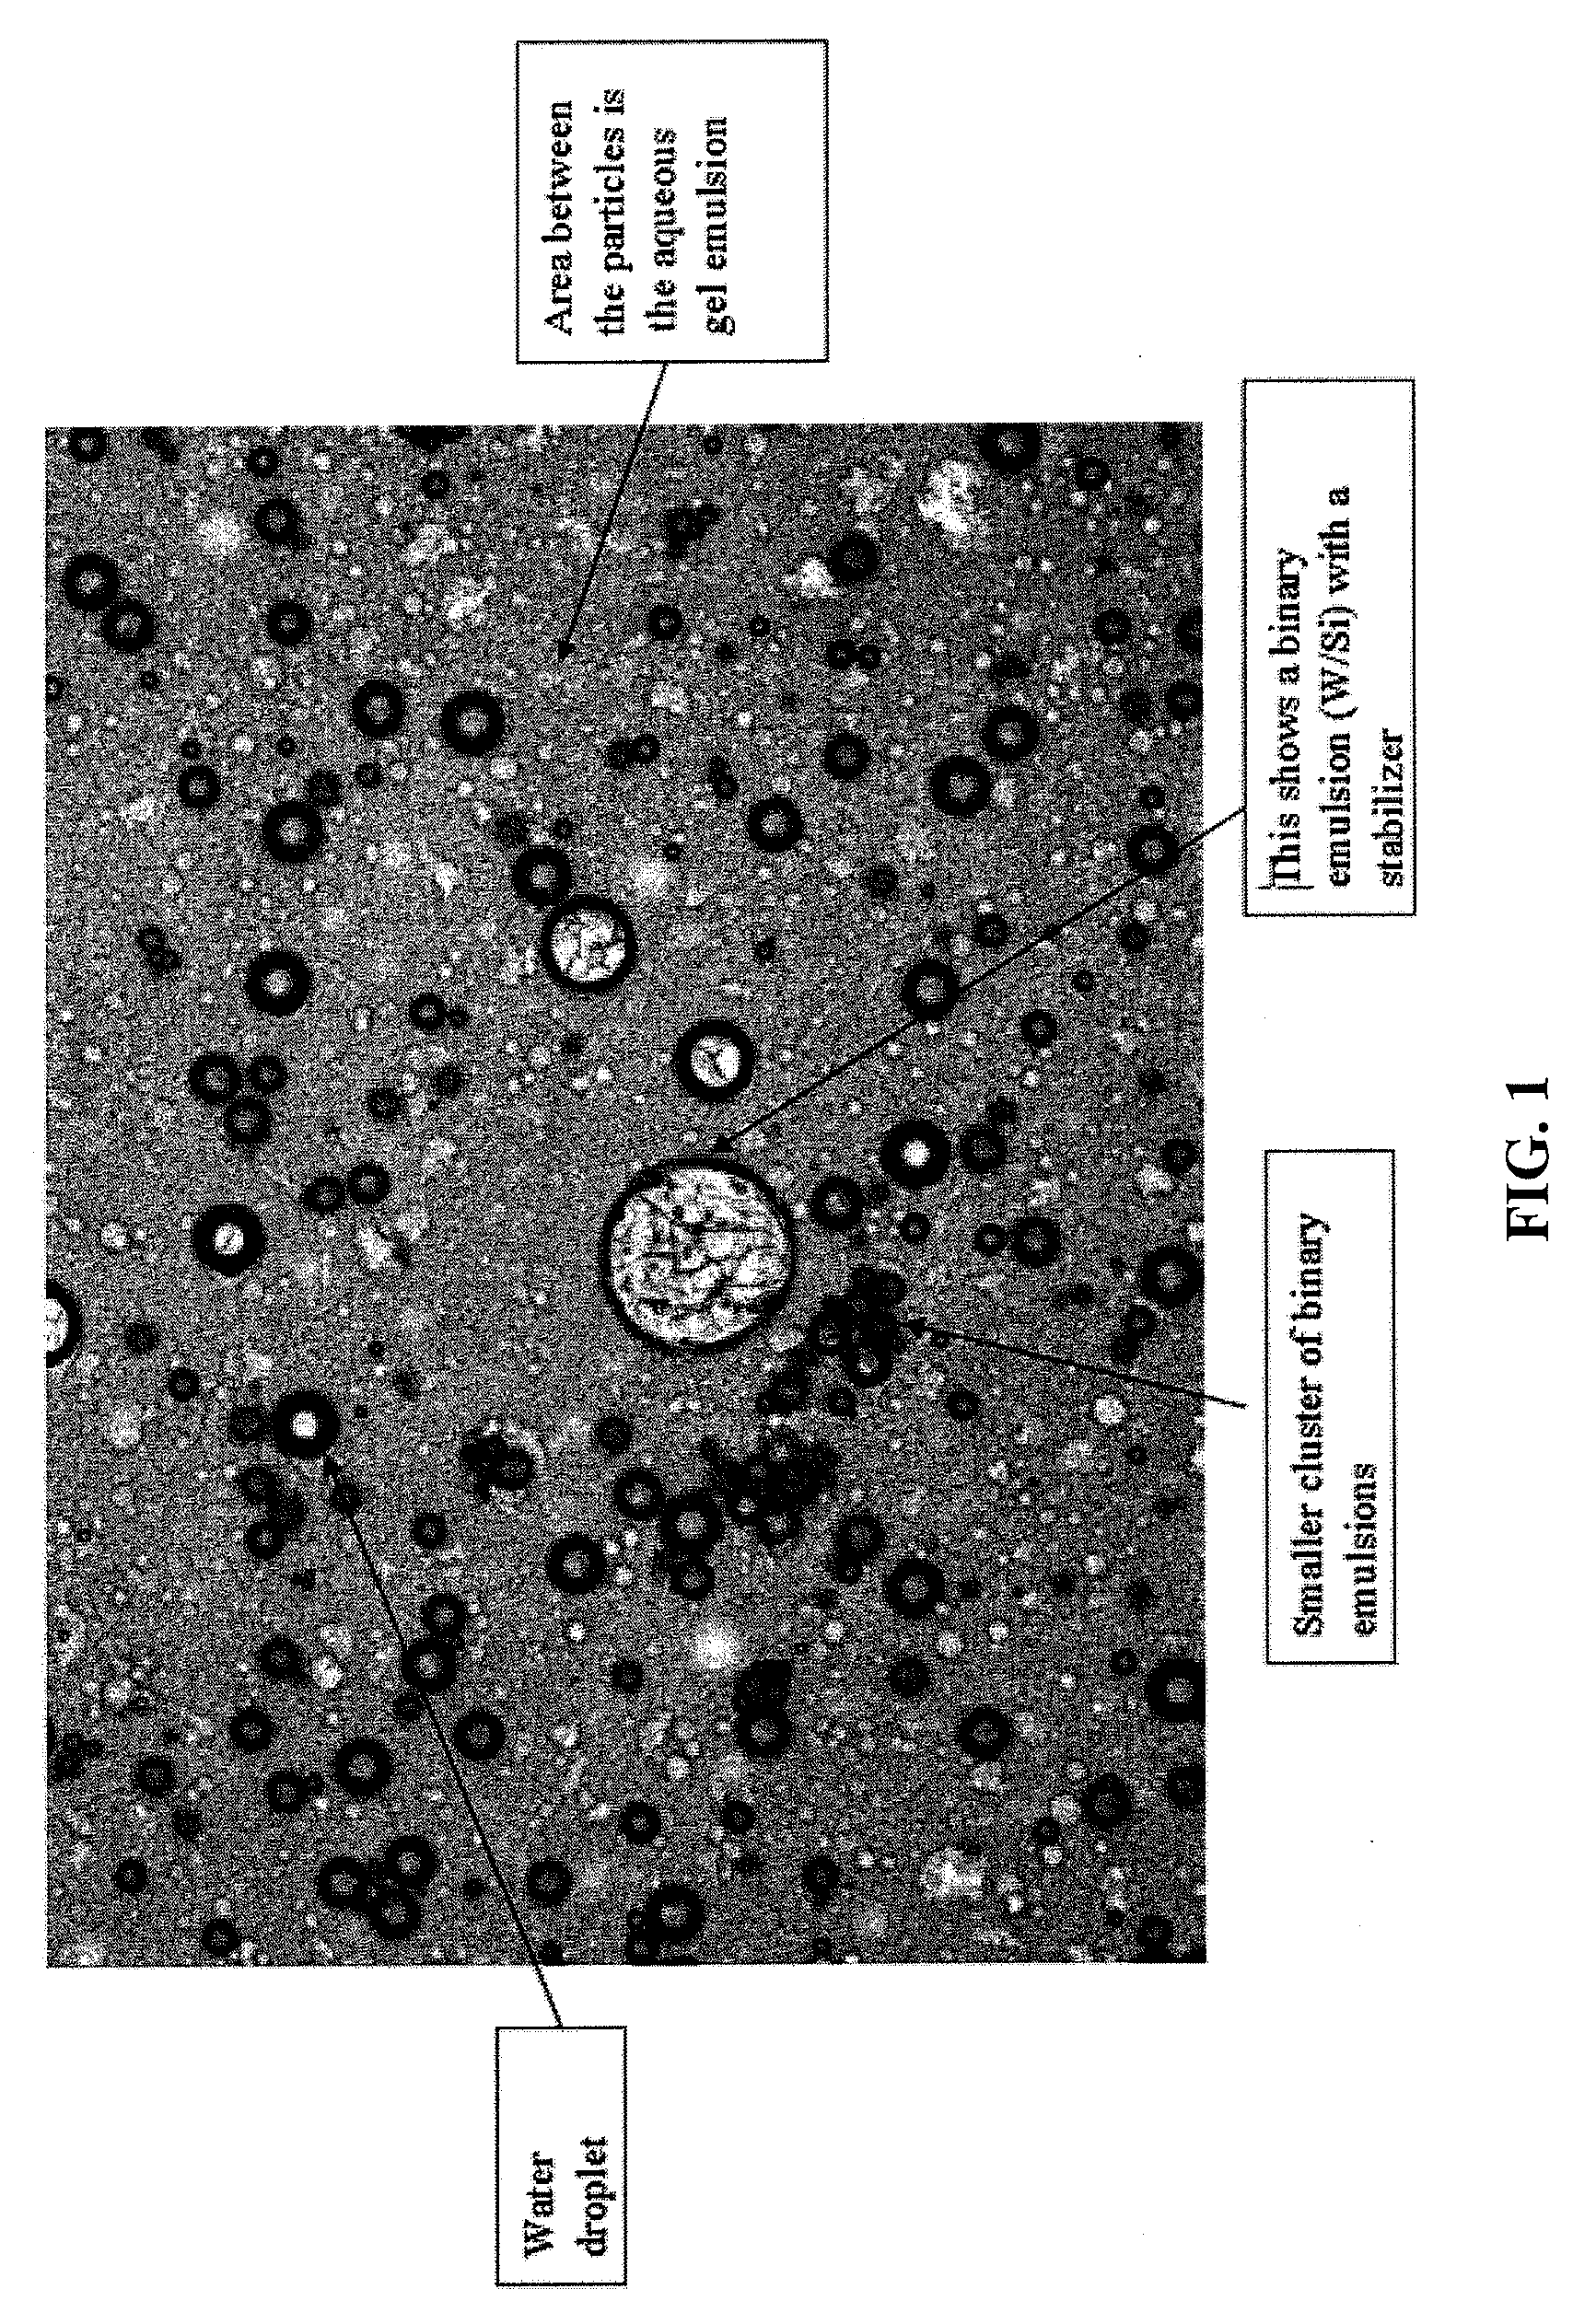 Stable three-phased emulsions